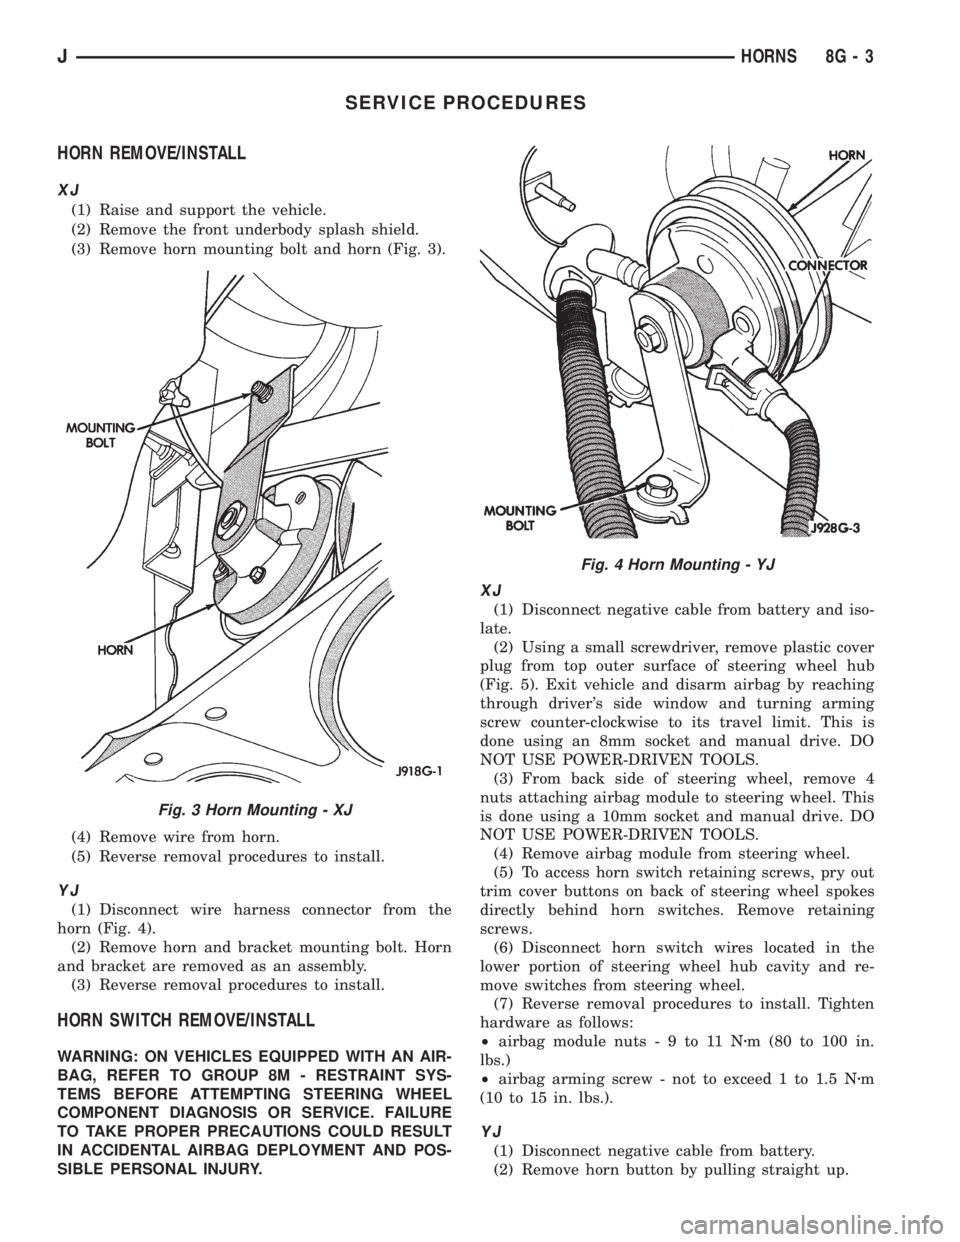 JEEP XJ 1995  Service And Repair Manual SERVICE PROCEDURES
HORN REMOVE/INSTALL
XJ
(1) Raise and support the vehicle.
(2) Remove the front underbody splash shield.
(3) Remove horn mounting bolt and horn (Fig. 3).
(4) Remove wire from horn.
(